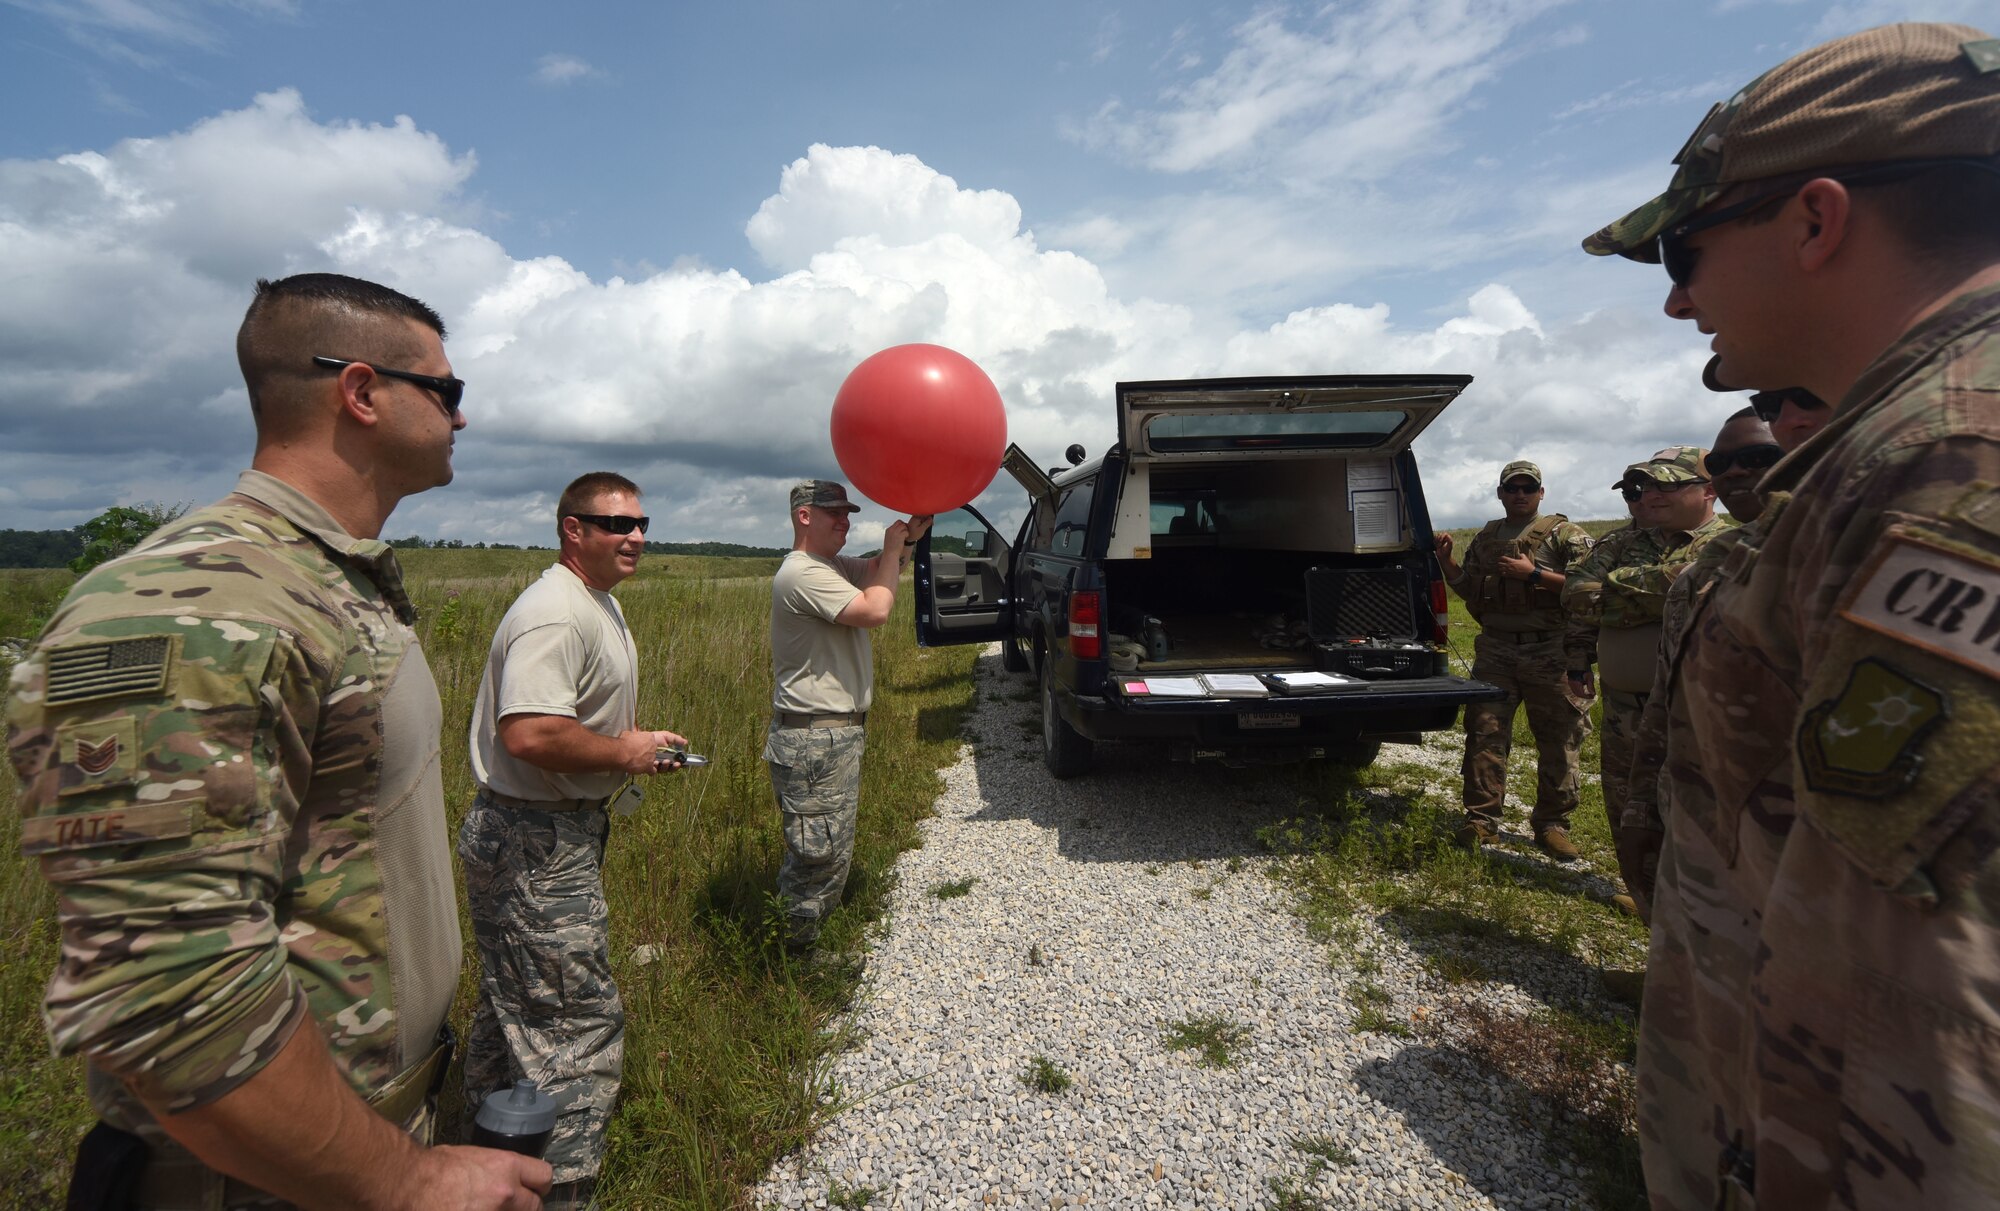 Air National Guard Airmen train 621st Contingency Response Airmen on weather balloons at Camp Branch in Logan County, W.Va., Aug. 21, 2018. The 621st CRG spent four days training with and working alongside the 130th ANG at Camp Branch practicing semi-prepared runway operations. (U.S. Air Force photo by Tech. Sgt. Jamie Powell)